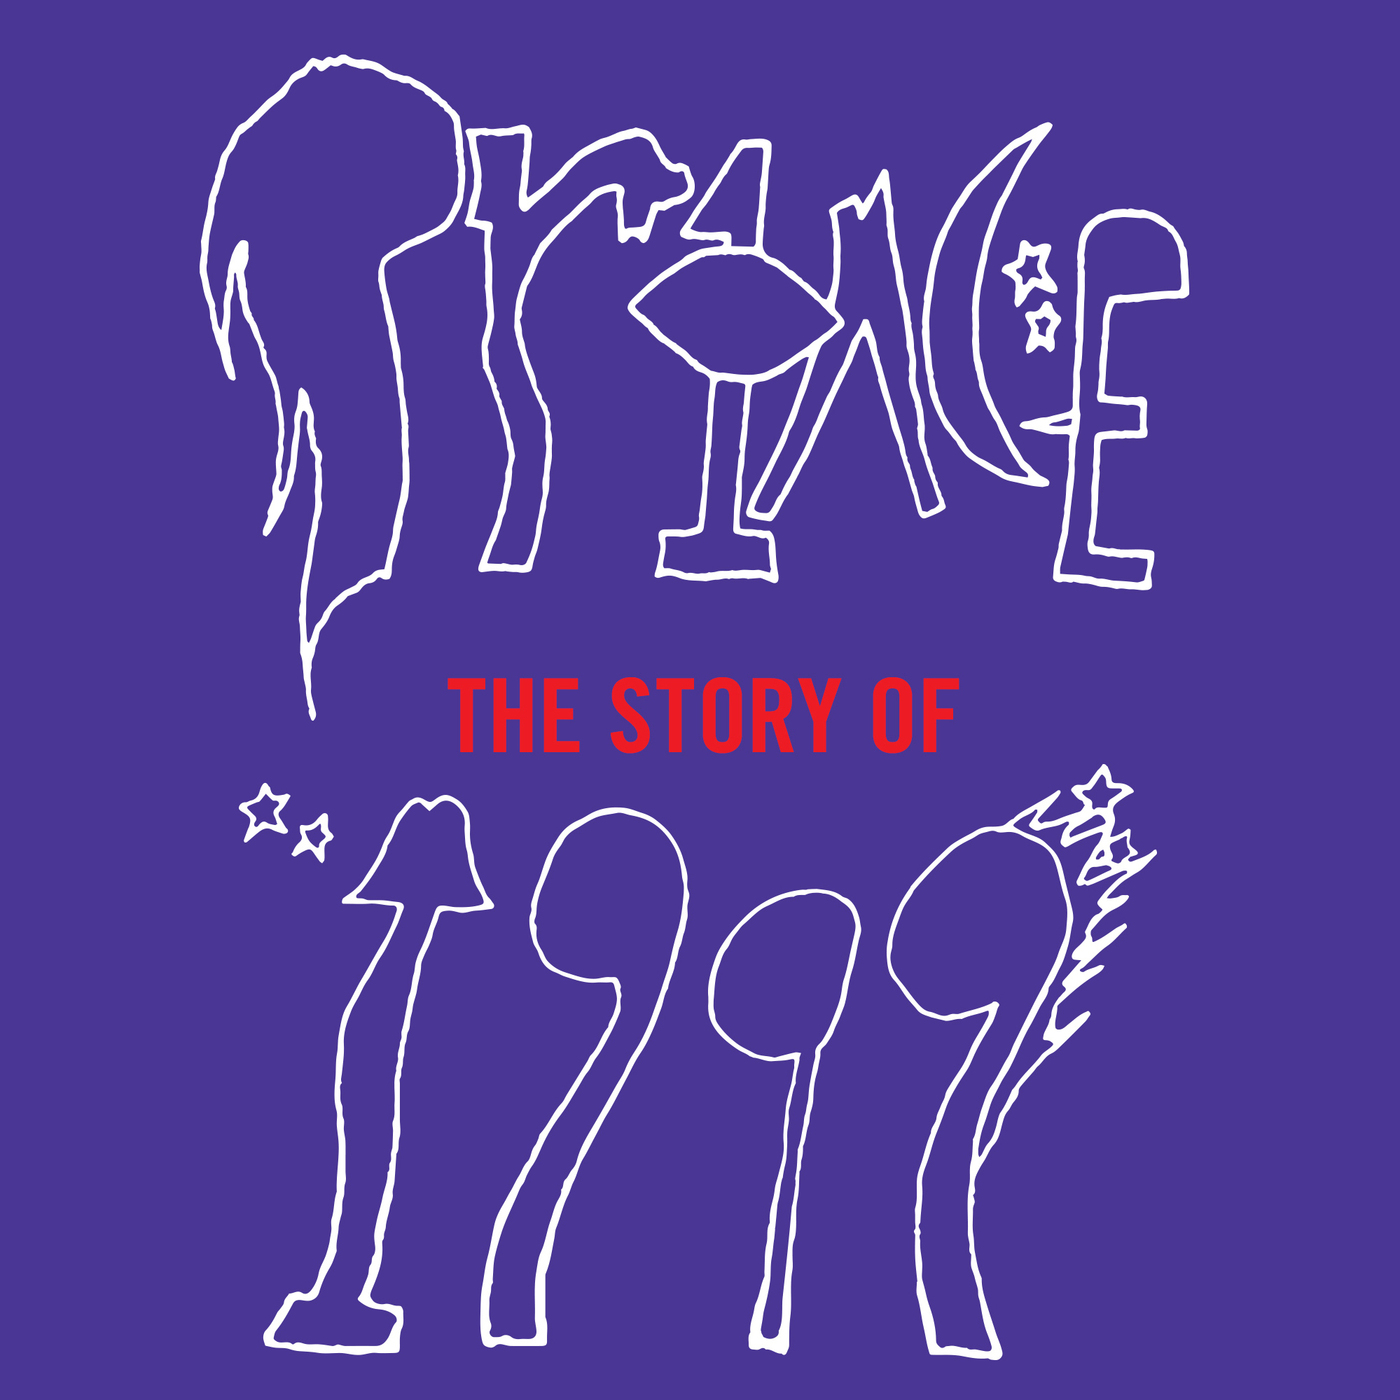 Prince: The Story of 1999, Episode 2: Rearrange